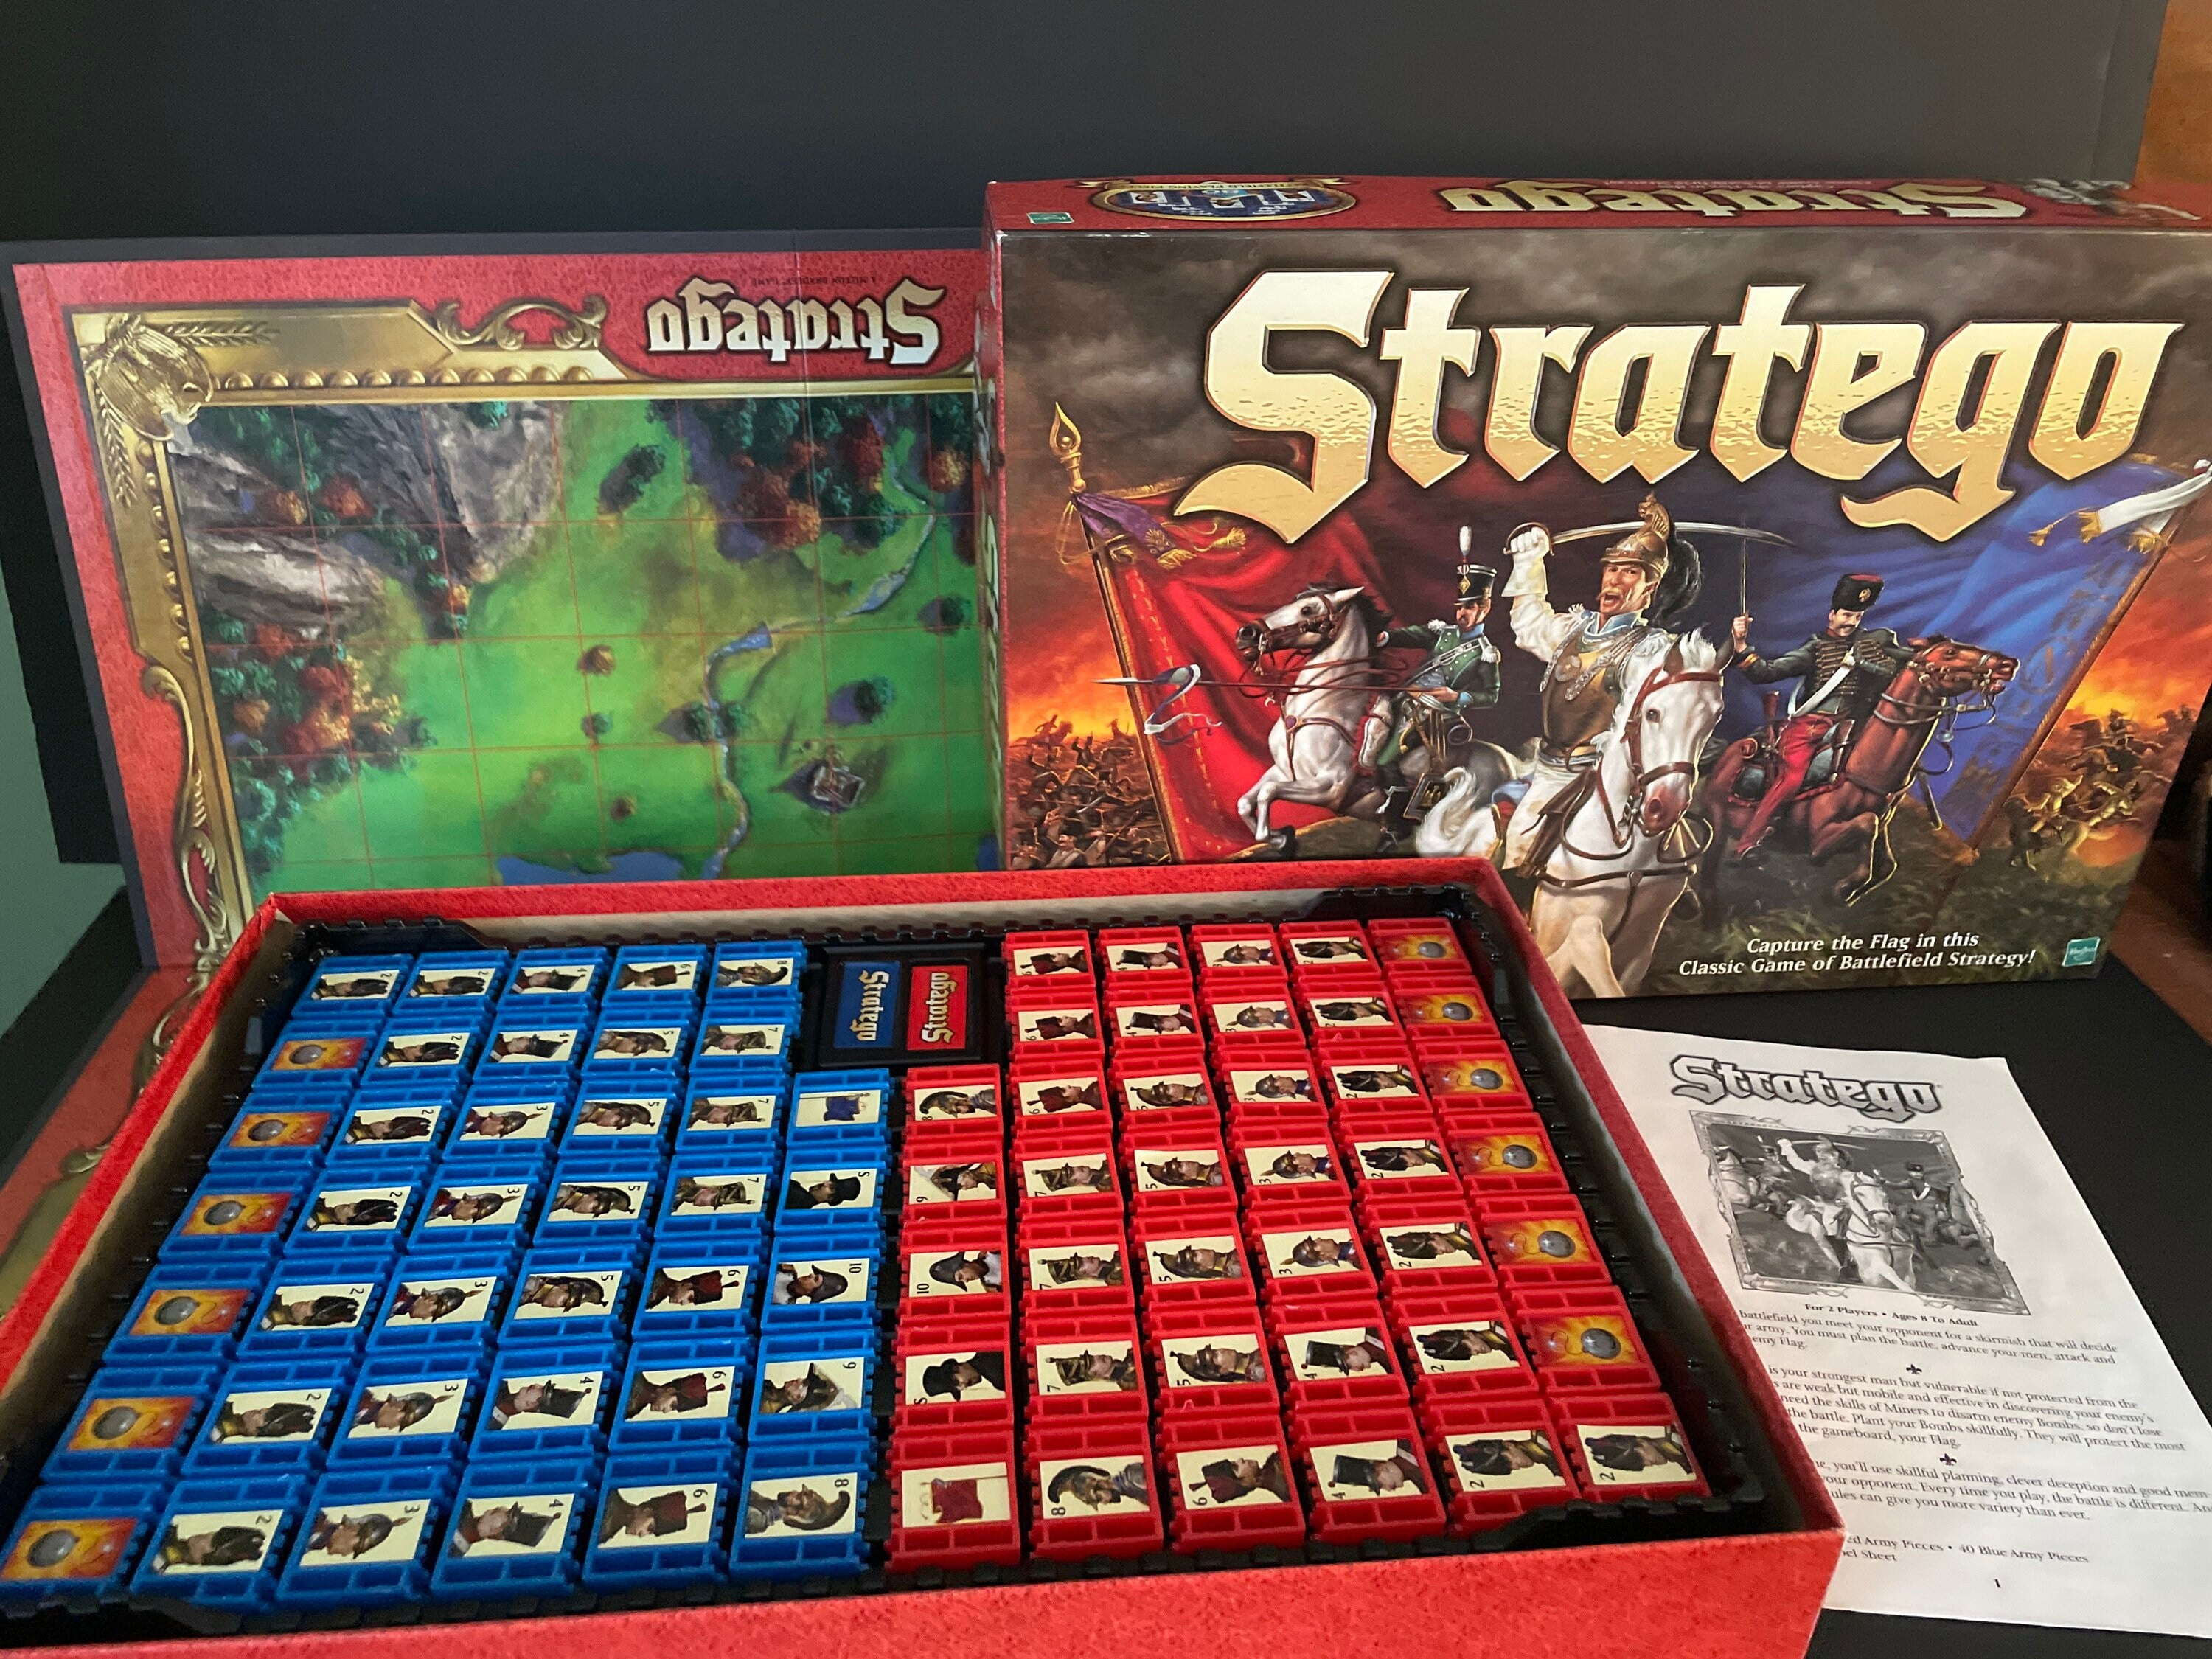 Could you recommend some board games suitable for 9 players